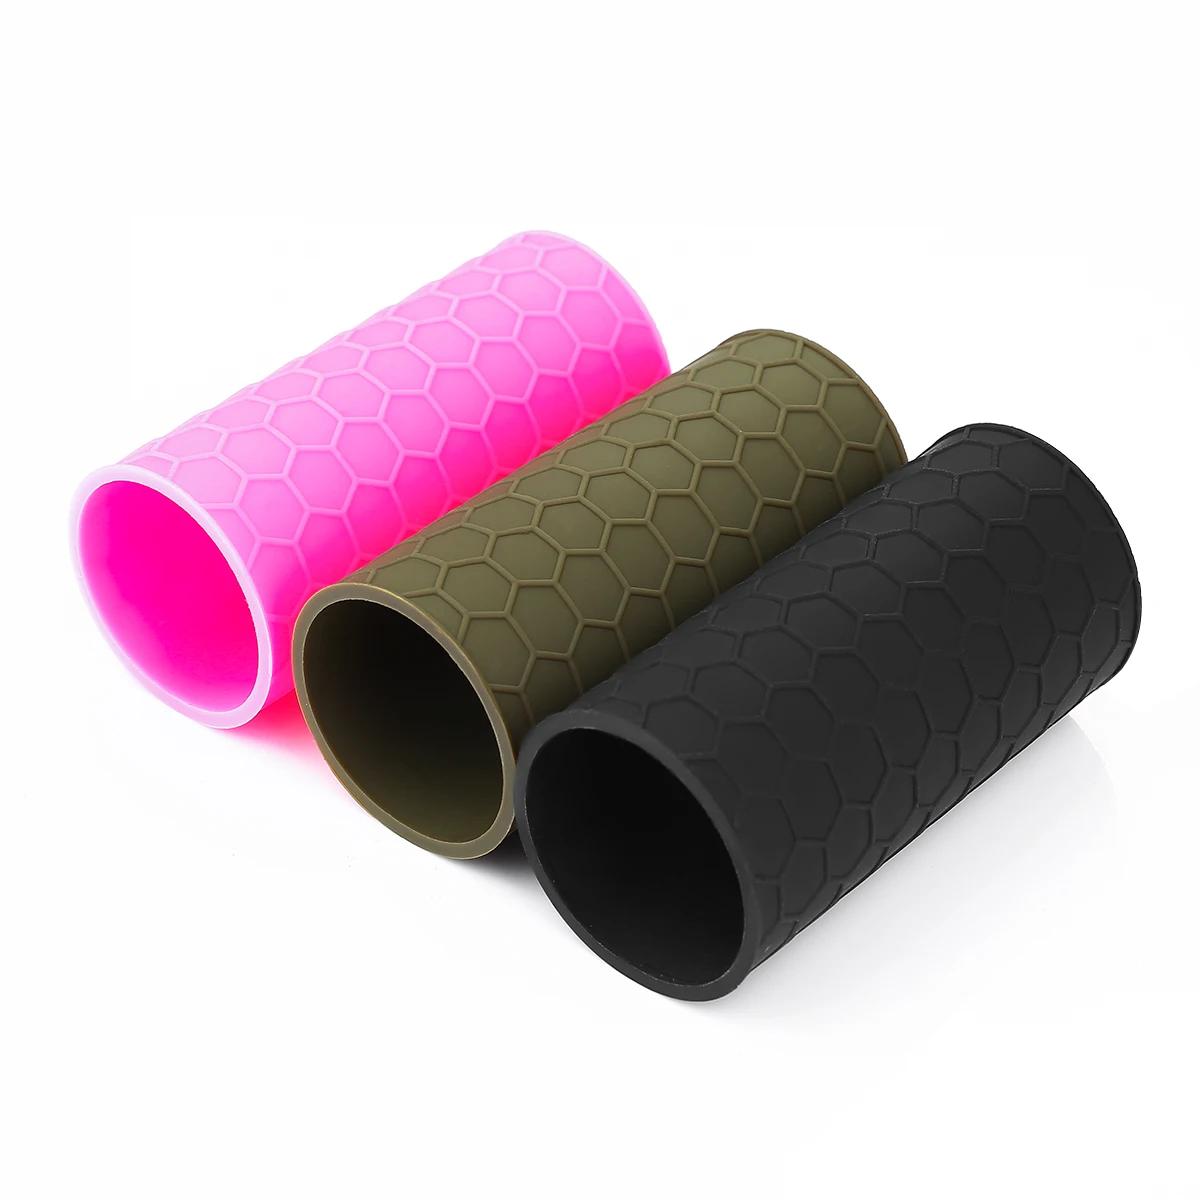 

Tactical Rubber Grip Cover Covert Clutch Universal Tactical Grip Sleeve with Hex Pattern